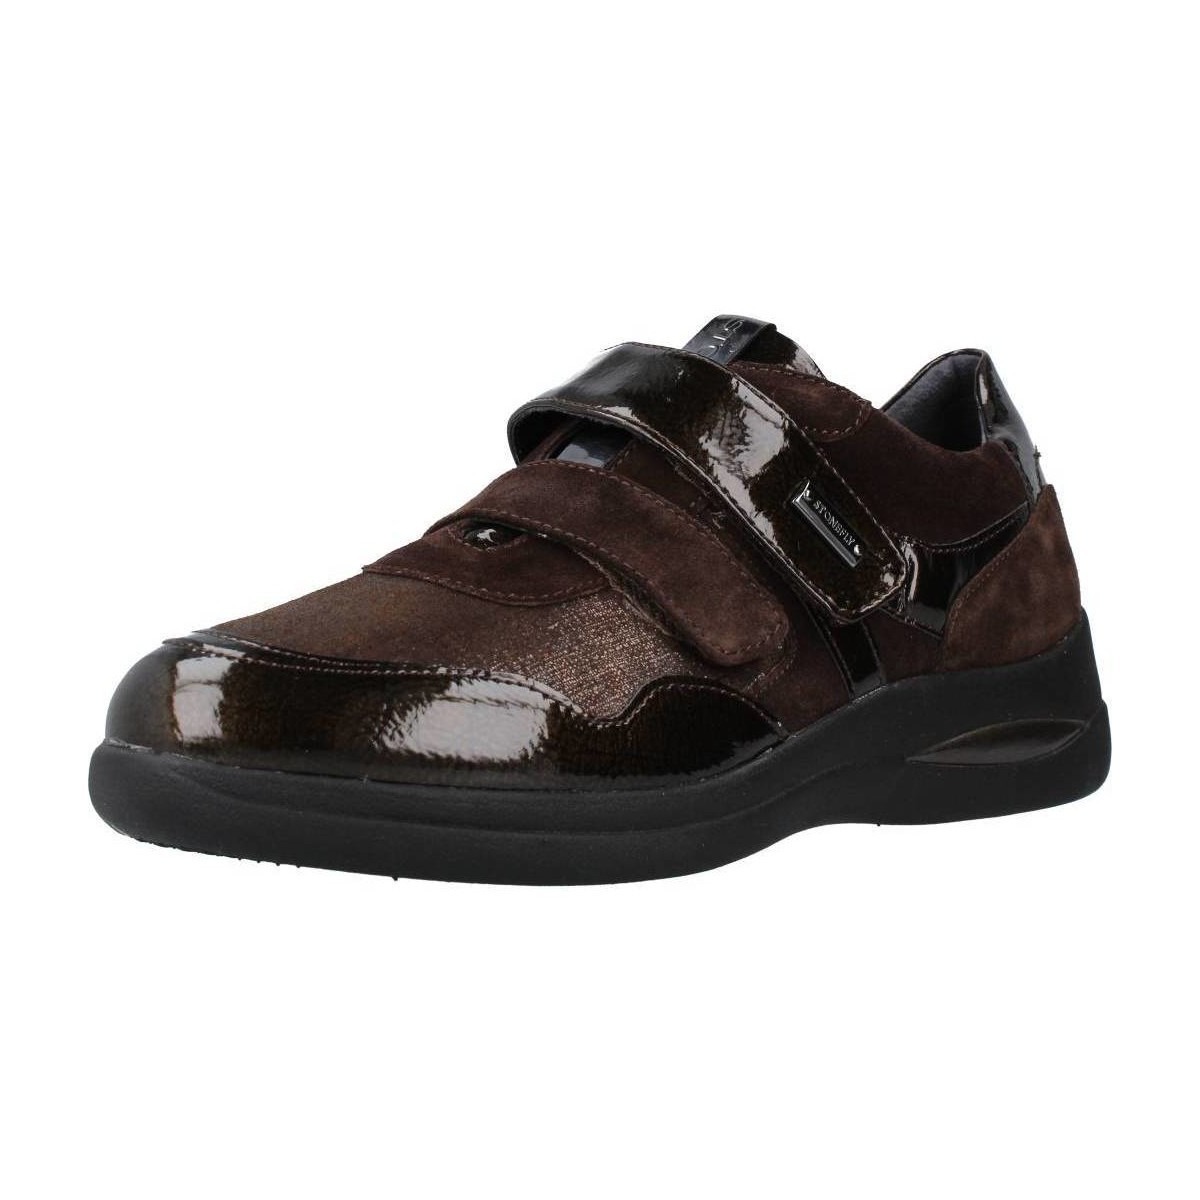 Stonefly Woman Brown Sneakers at Spartoo GOOFASH